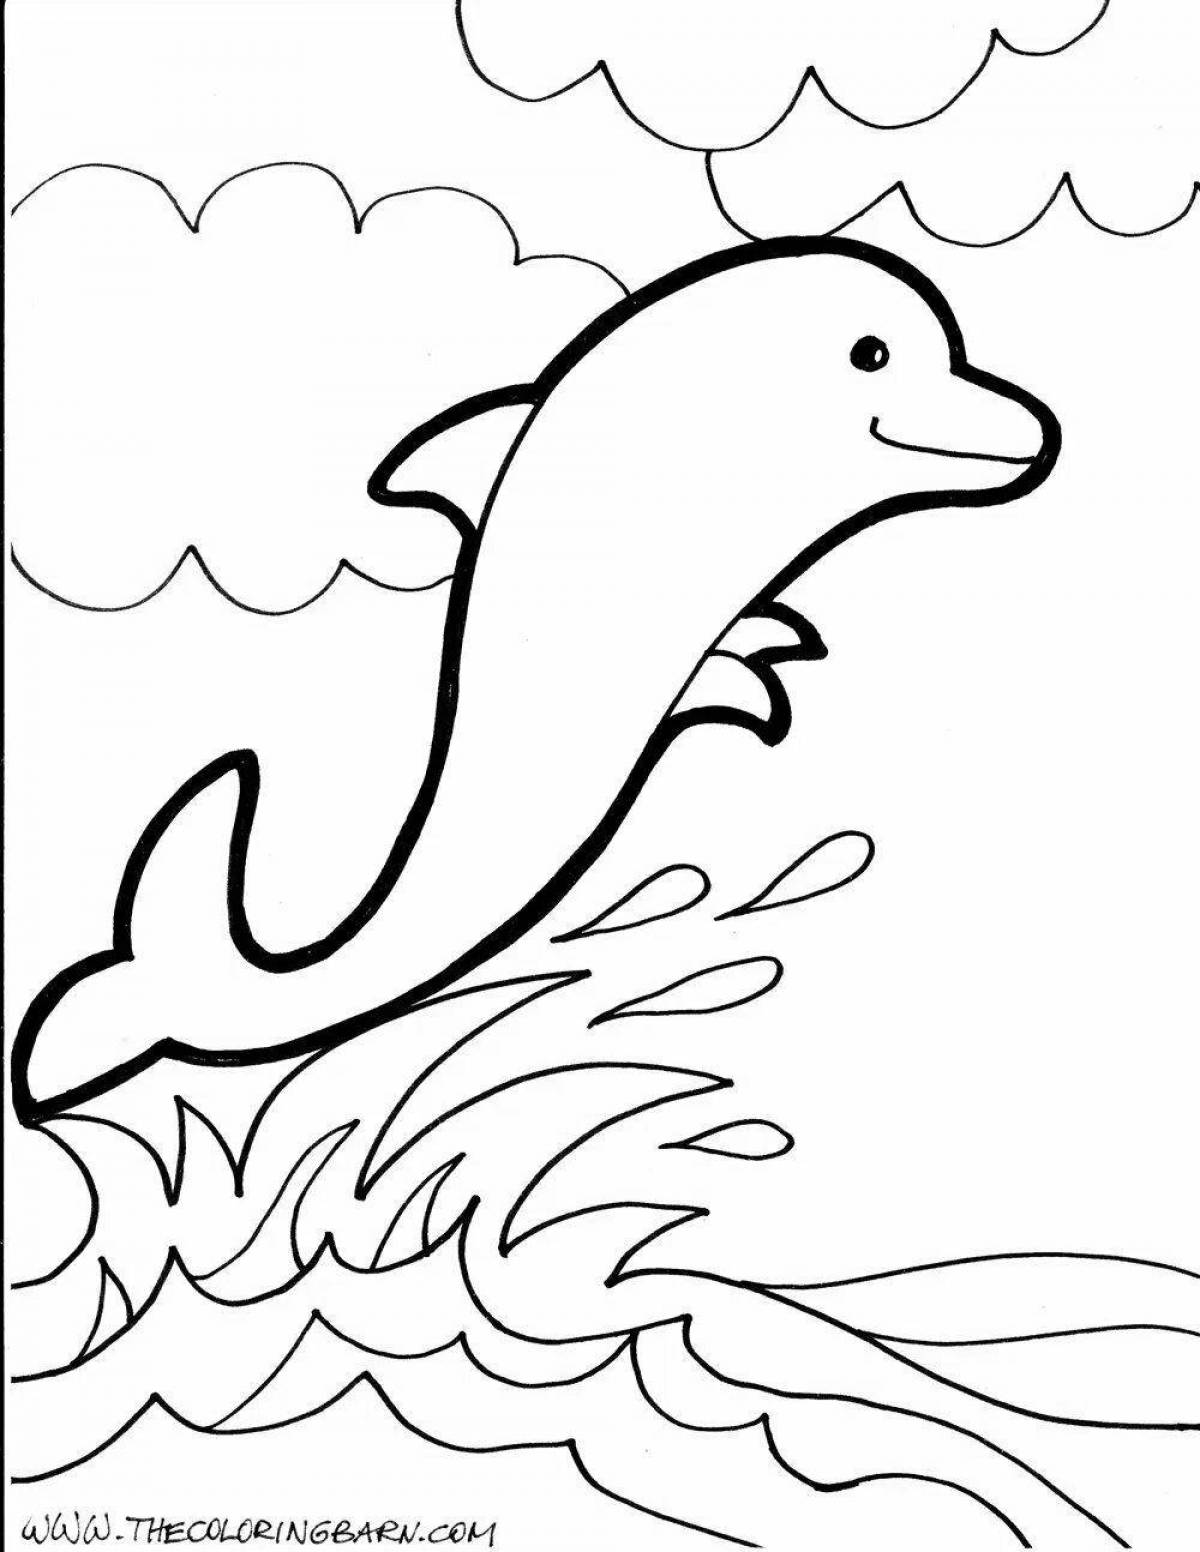 Relaxing dolphin coloring page